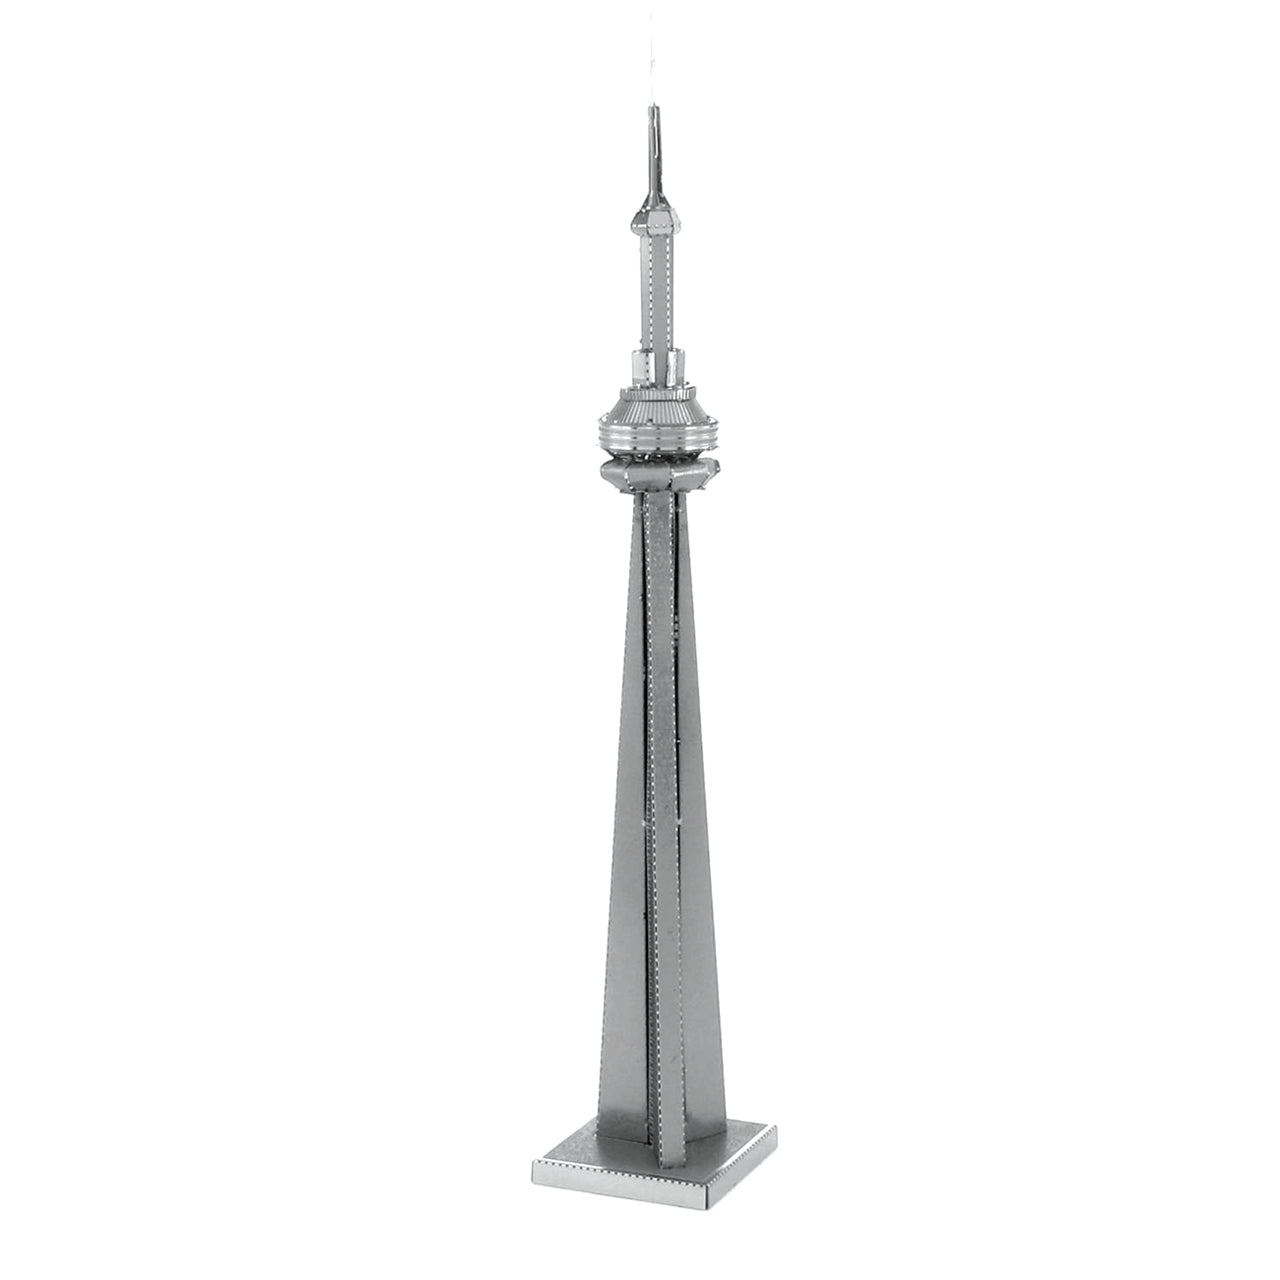 FMW058 CN Tower (Buildable) 